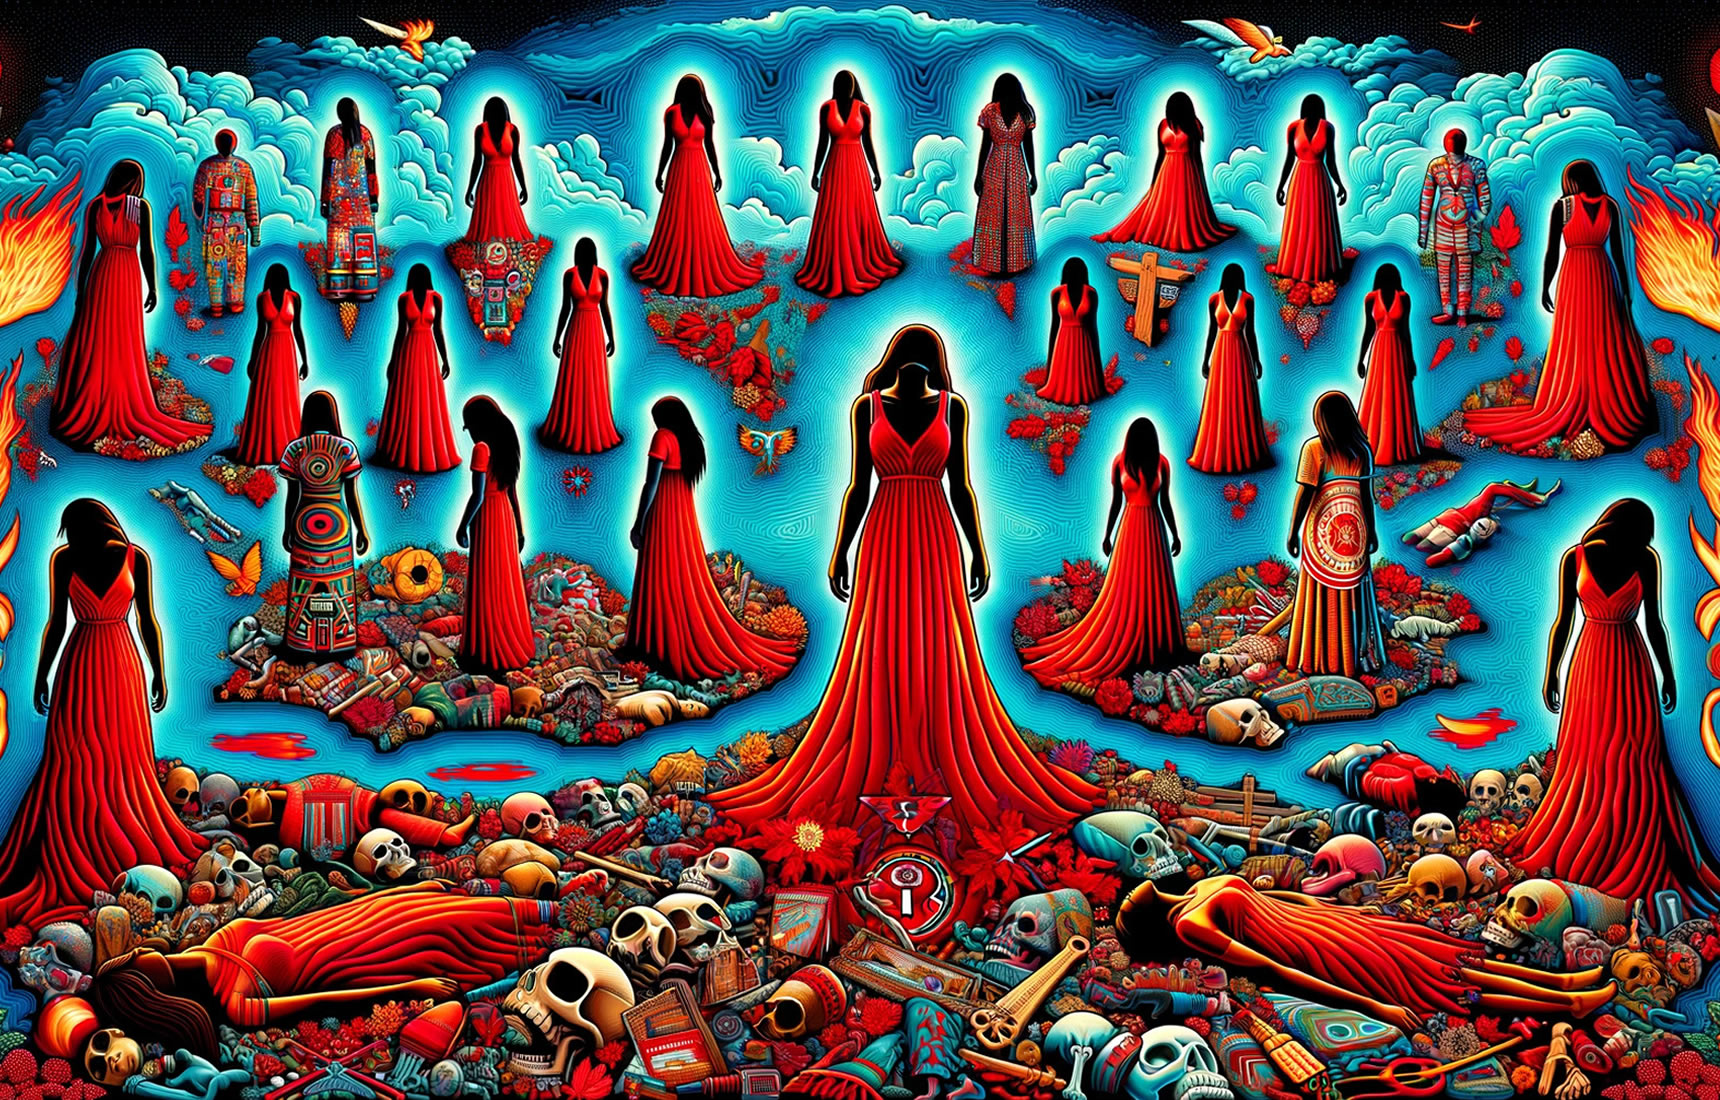 Introduction to Missing and Murdered Indigenous Women, Girls, and 2SLGBTQQIA+ Peoples